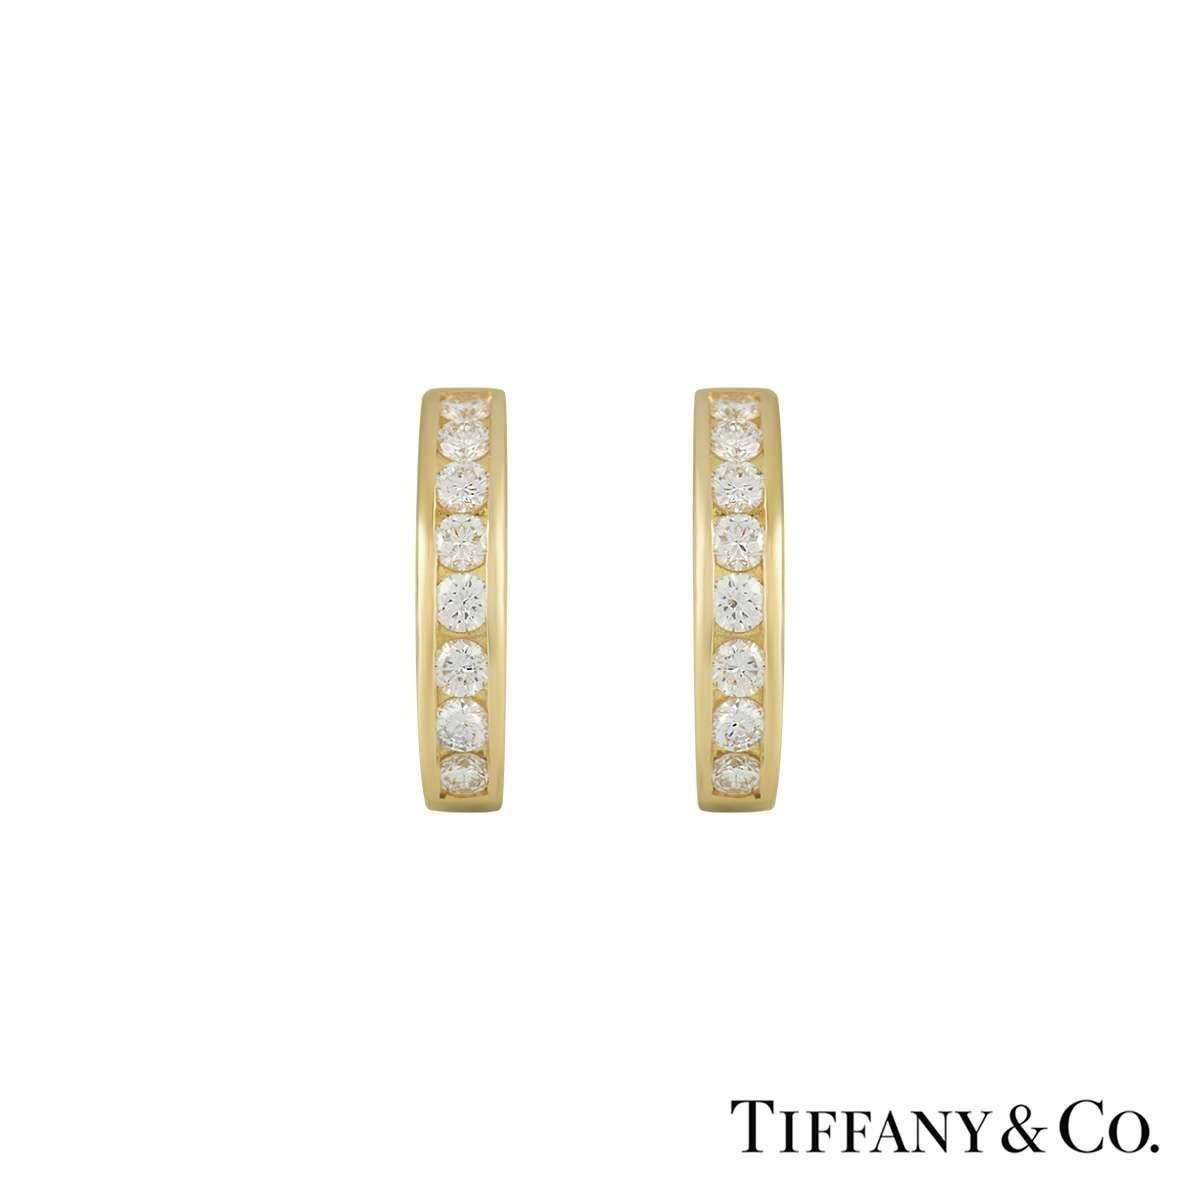 A beautiful pair of diamond set hoop earrings by Tiffany & Co. The hoops are channel set with 8 diamonds in each hoop and totals to approximately 0.96ct. The earrings feature post and clip fittings and measure 18mm in height and 3.7mm in width and